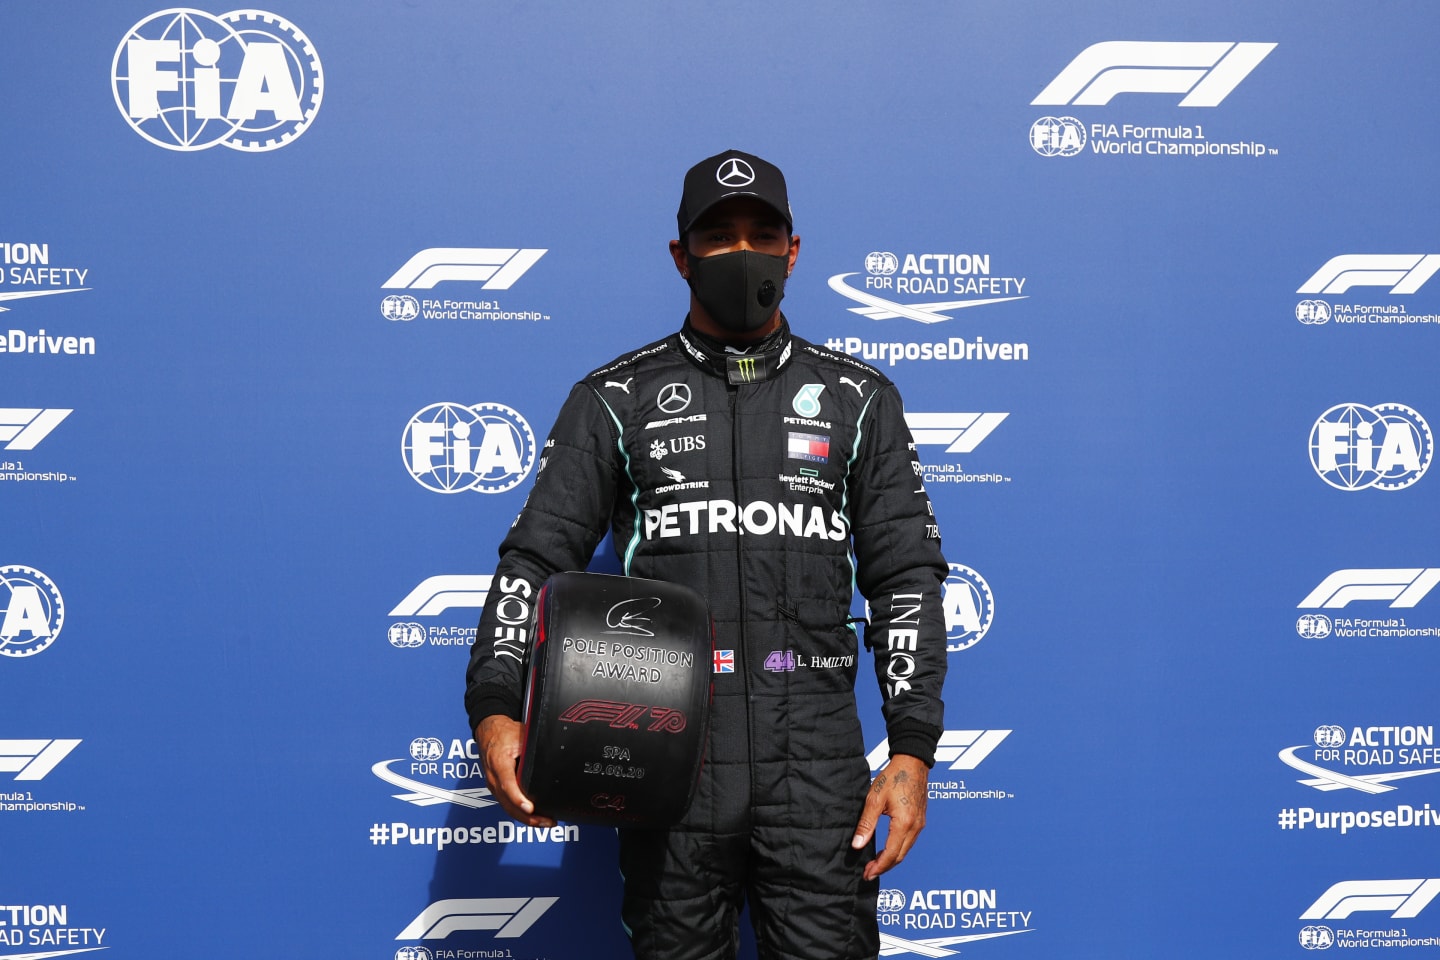 SPA, BELGIUM - AUGUST 29: Pole position qualifier Lewis Hamilton of Great Britain and Mercedes GP celebrates in parc ferme  during qualifying for the F1 Grand Prix of Belgium at Circuit de Spa-Francorchamps on August 29, 2020 in Spa, Belgium. (Photo by Francois Lenoir/Pool via Getty Images)